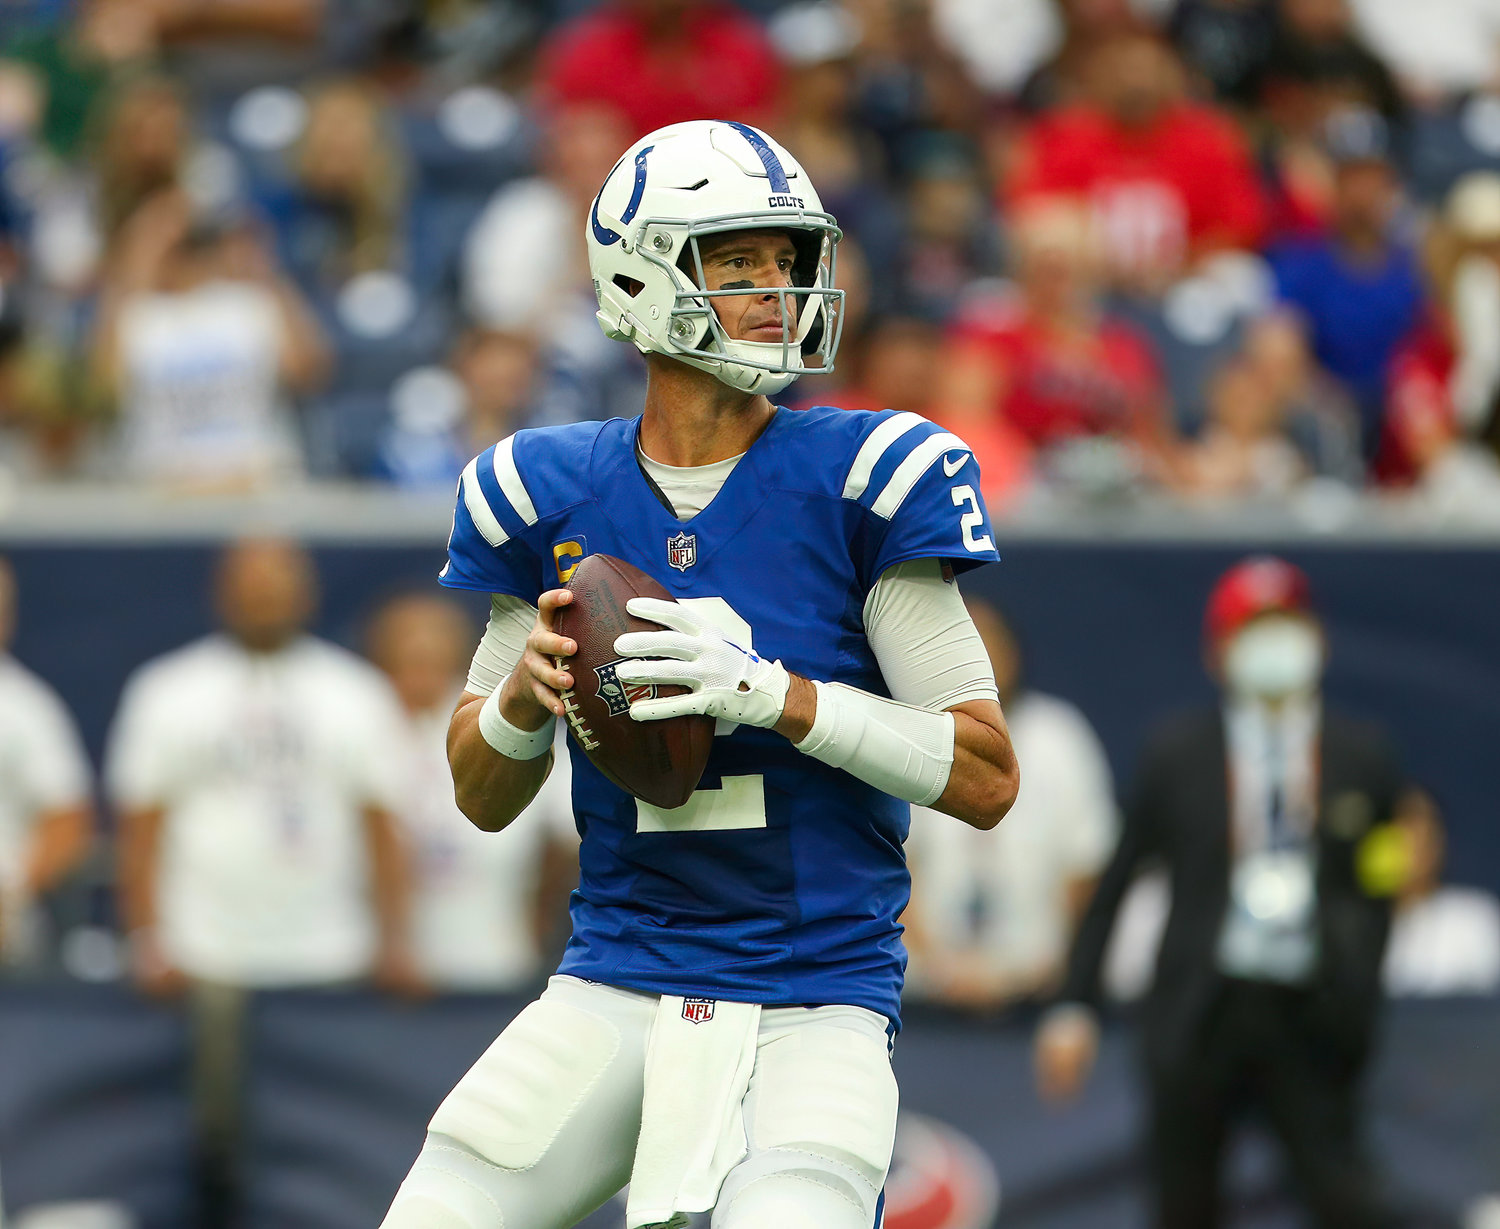 Indianapolis Colts quarterback Matt Ryan (2) looks to pass during an NFL game between the Texans and the Colts on September 11, 2022 in Houston. The game ended in a 20-20 tie after a scoreless overtime period.